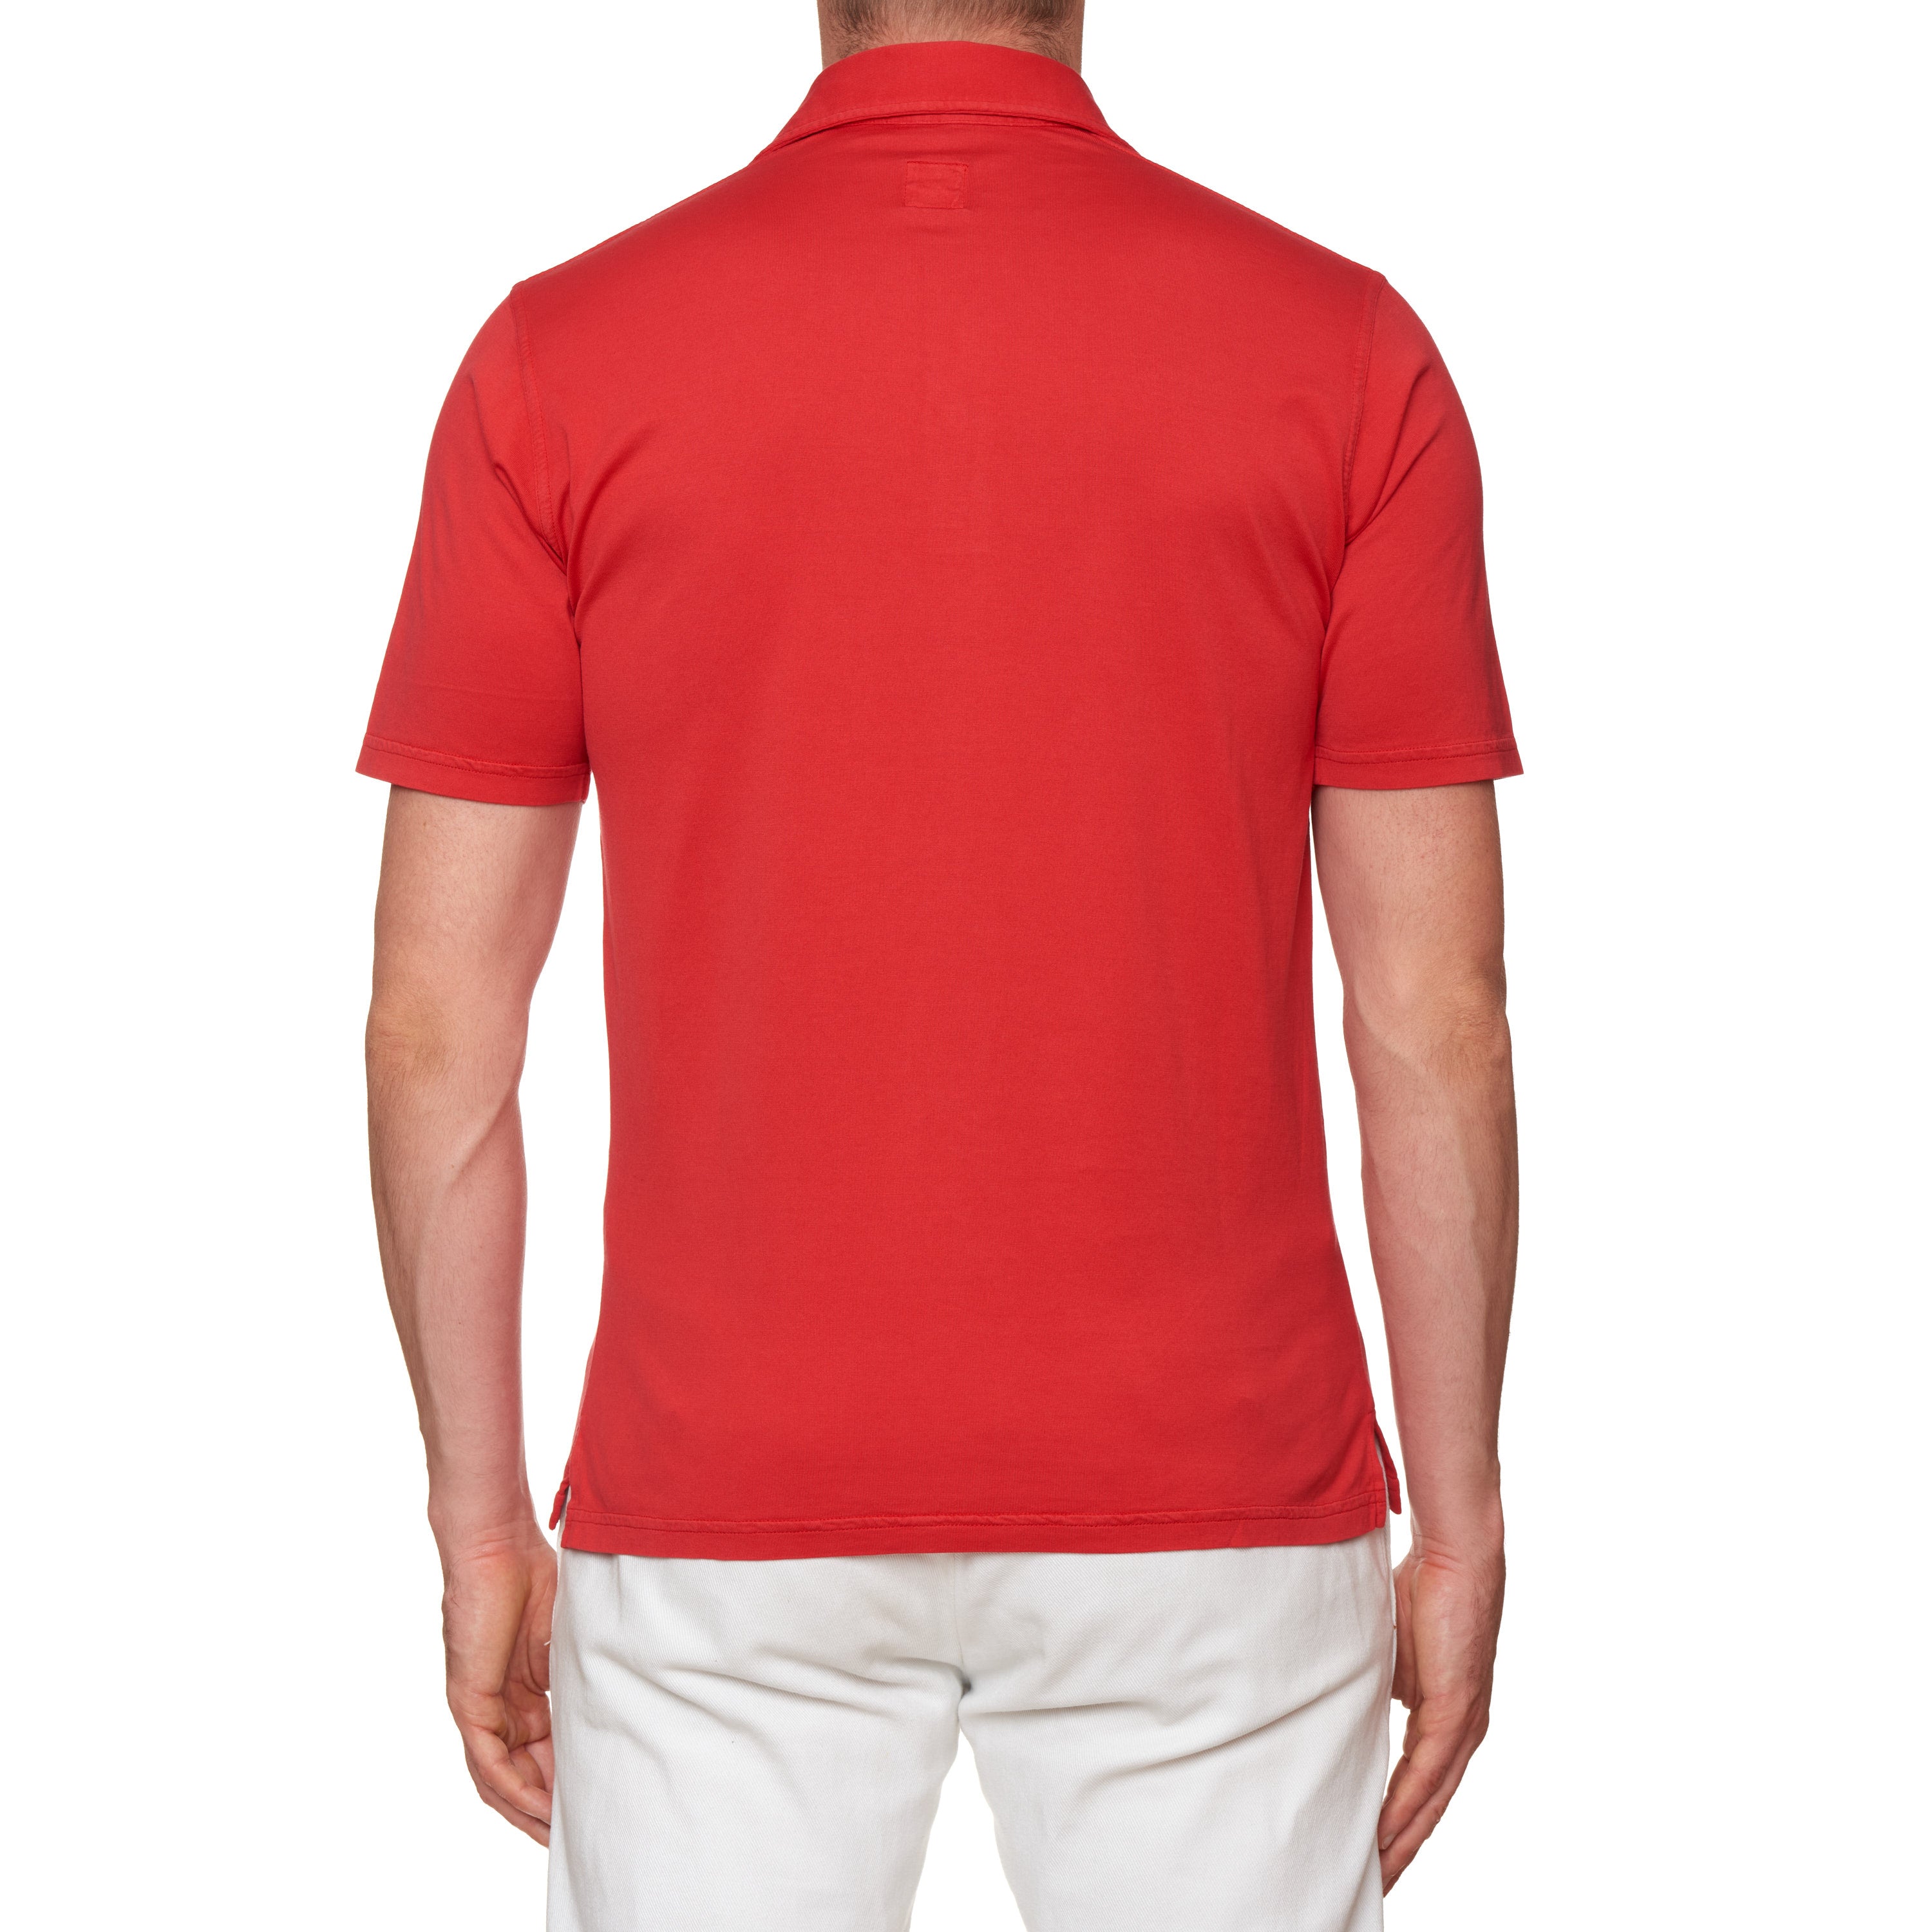 FEDELI "Zero" Red Cotton Frosted Short Sleeve Jersey Polo Shirt 48 NEW S Slim FEDELI